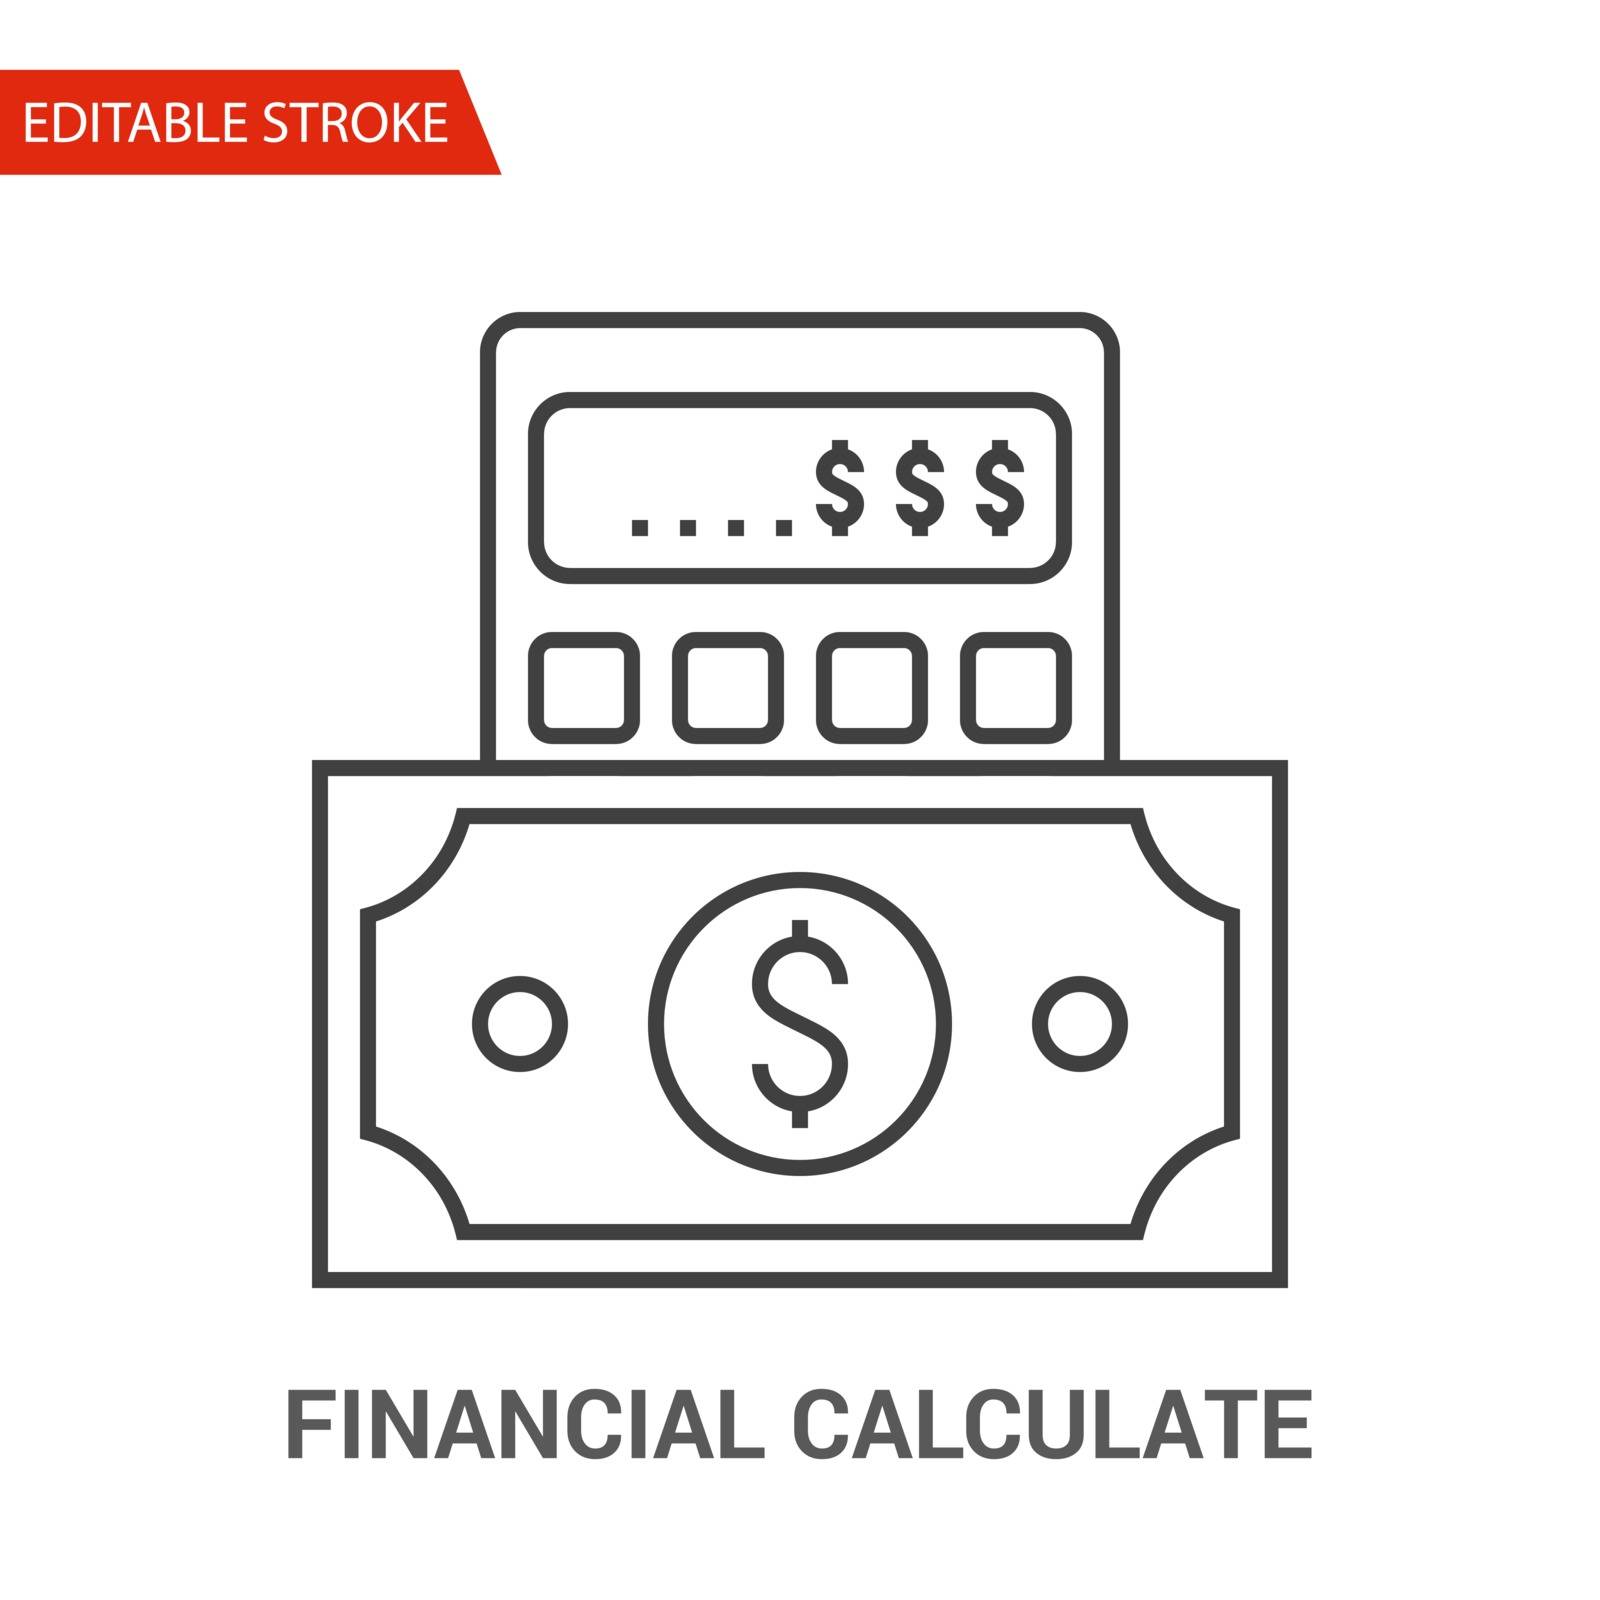 Financial Calculate Icon. Thin Line Vector Illustration by smoki